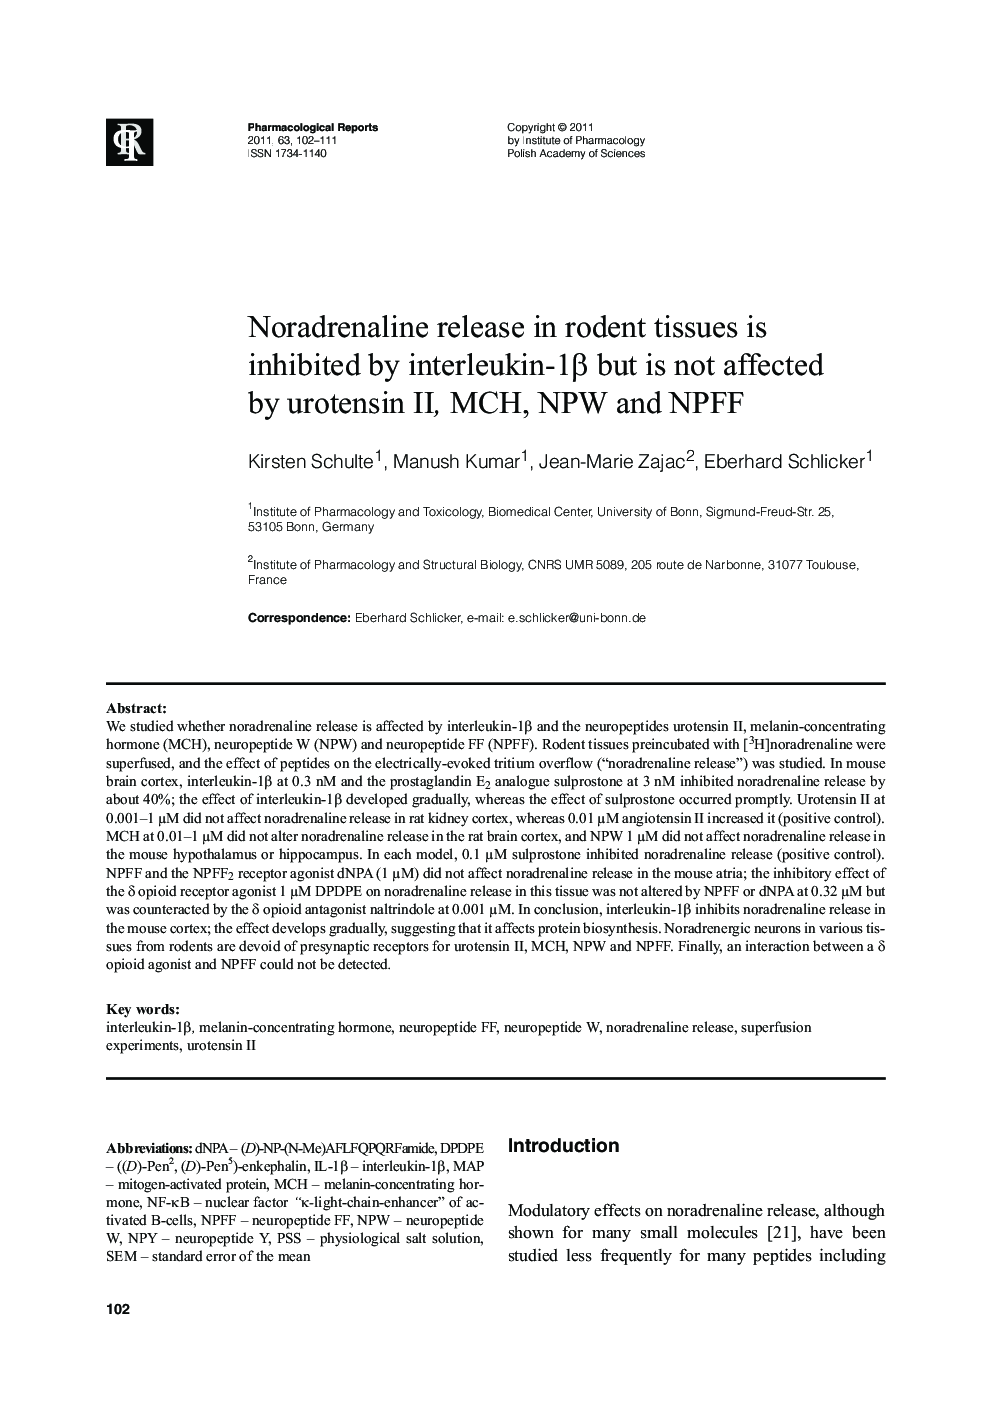 Noradrenaline release in rodent tissues is inhibited by interleukin-1β but is not affected by urotensin II, MCH, NPW and NPFF